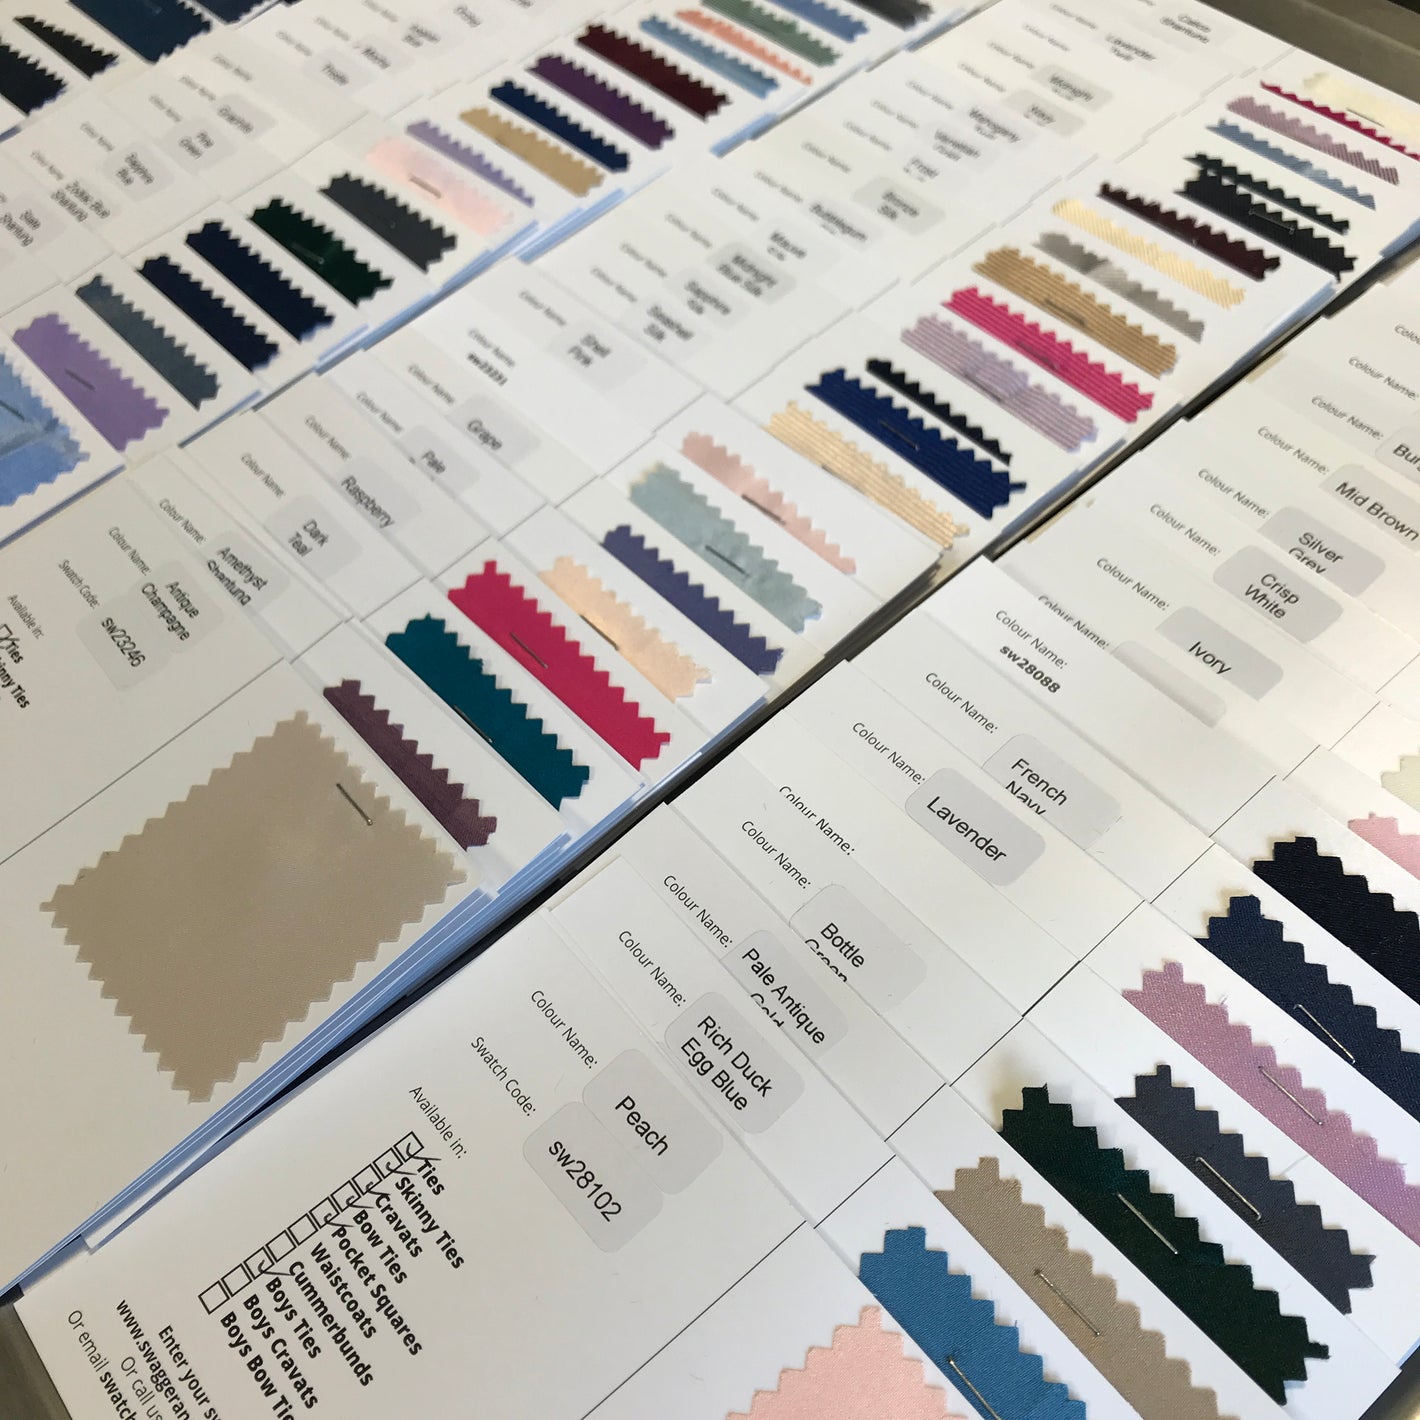 Wedding Ties Swatches for Matching Bridesmaid Dress